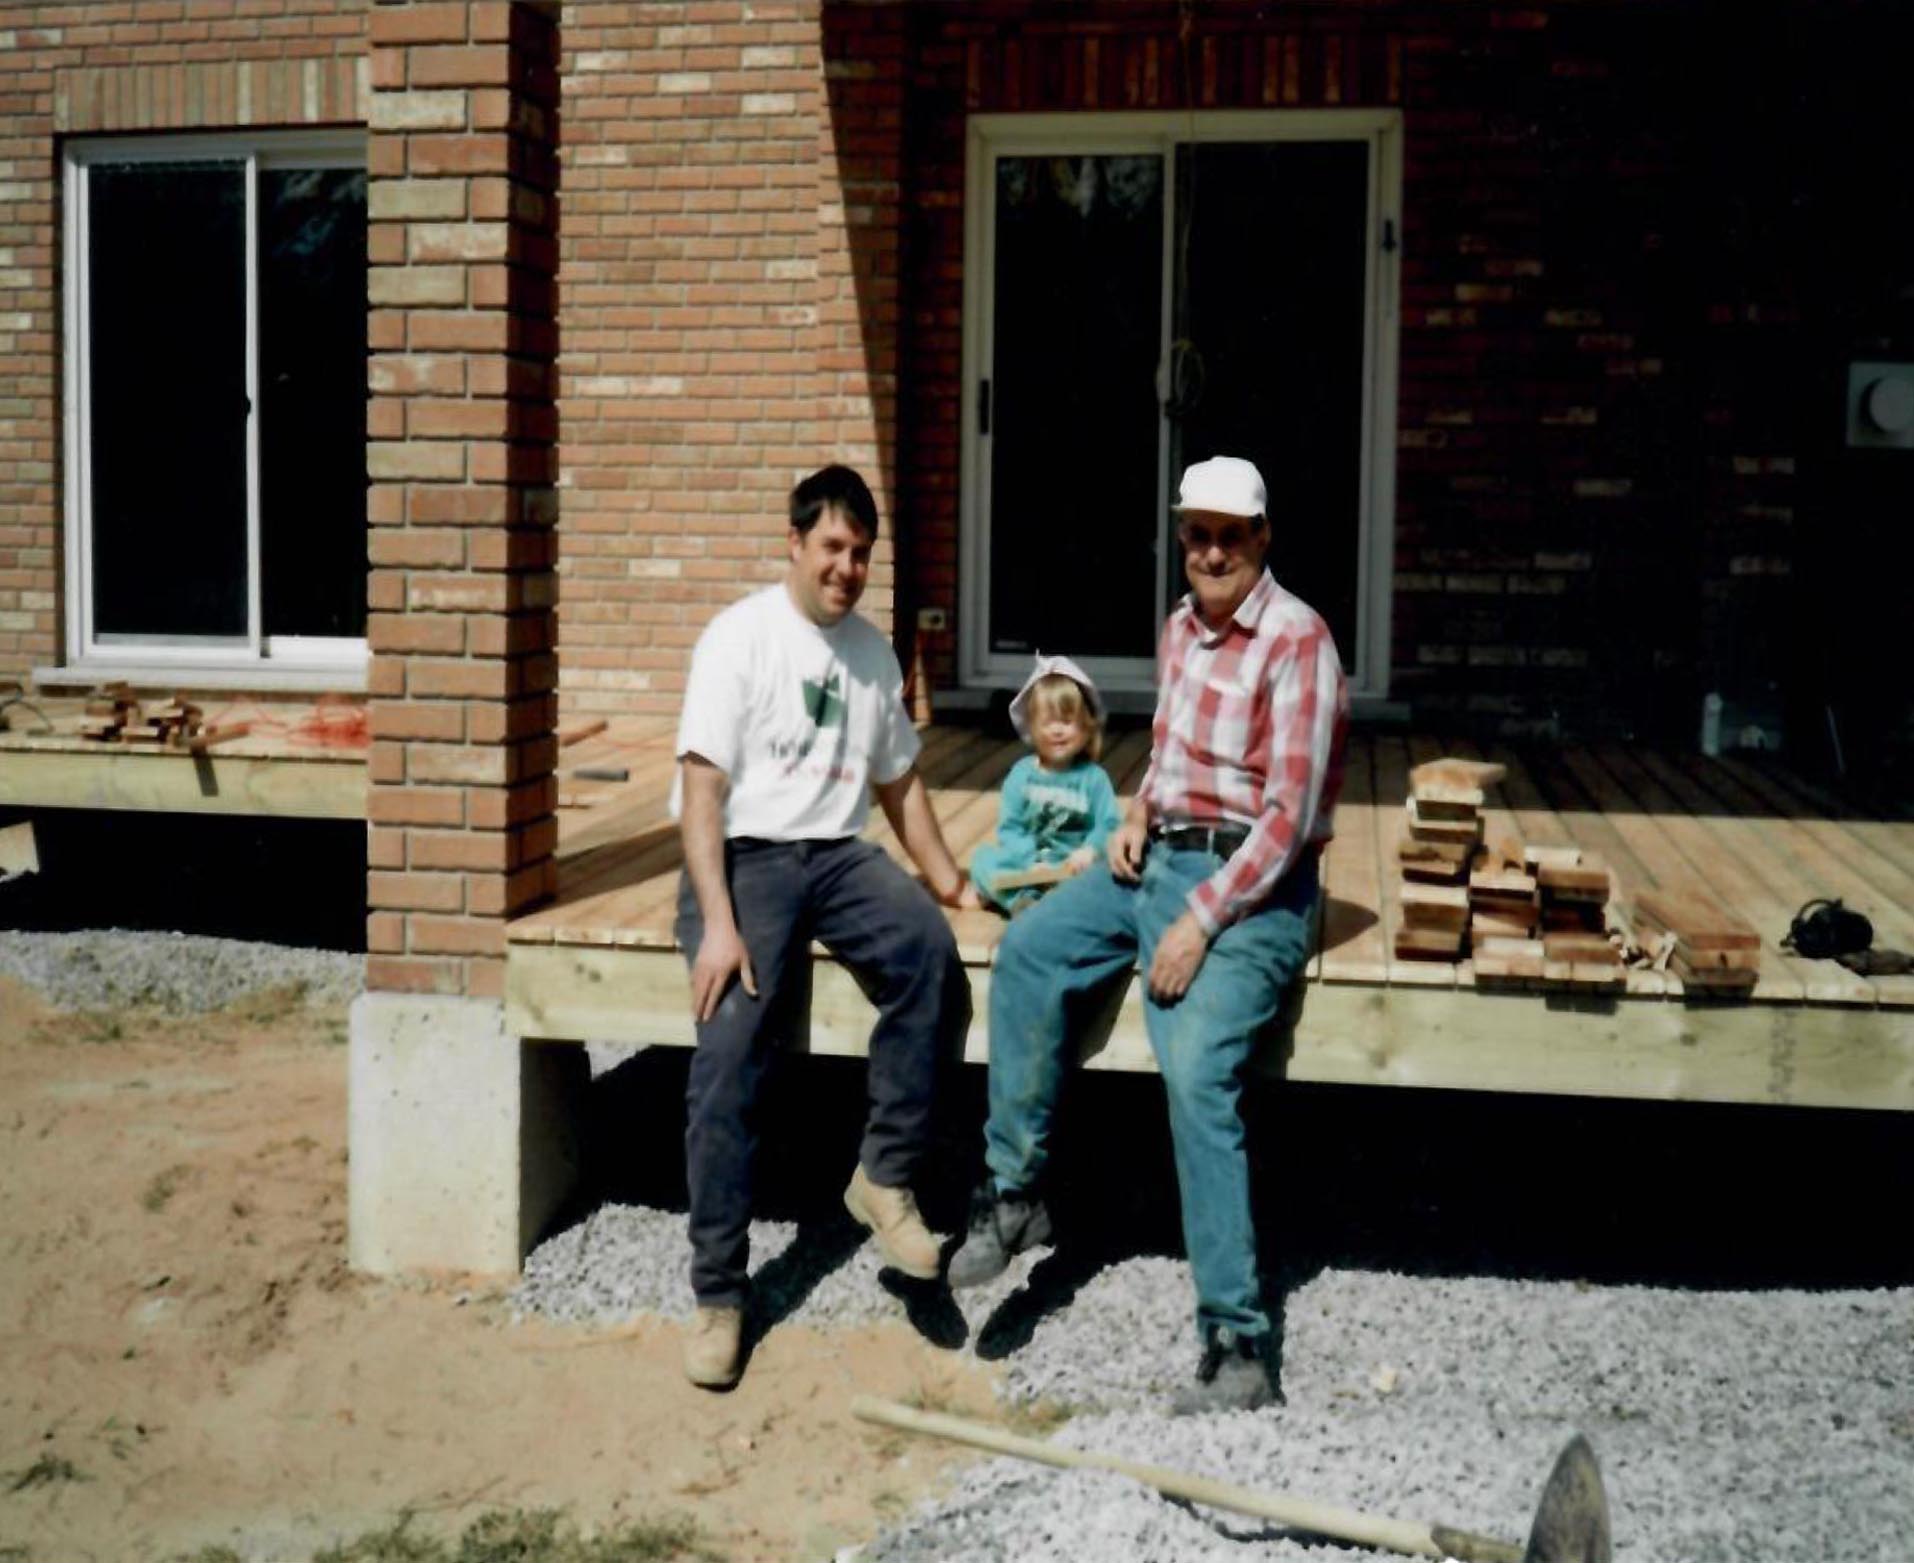 1987 - Working at new home in Fenwick, Taking a break with daughter Michela, Domenico and Gabriele